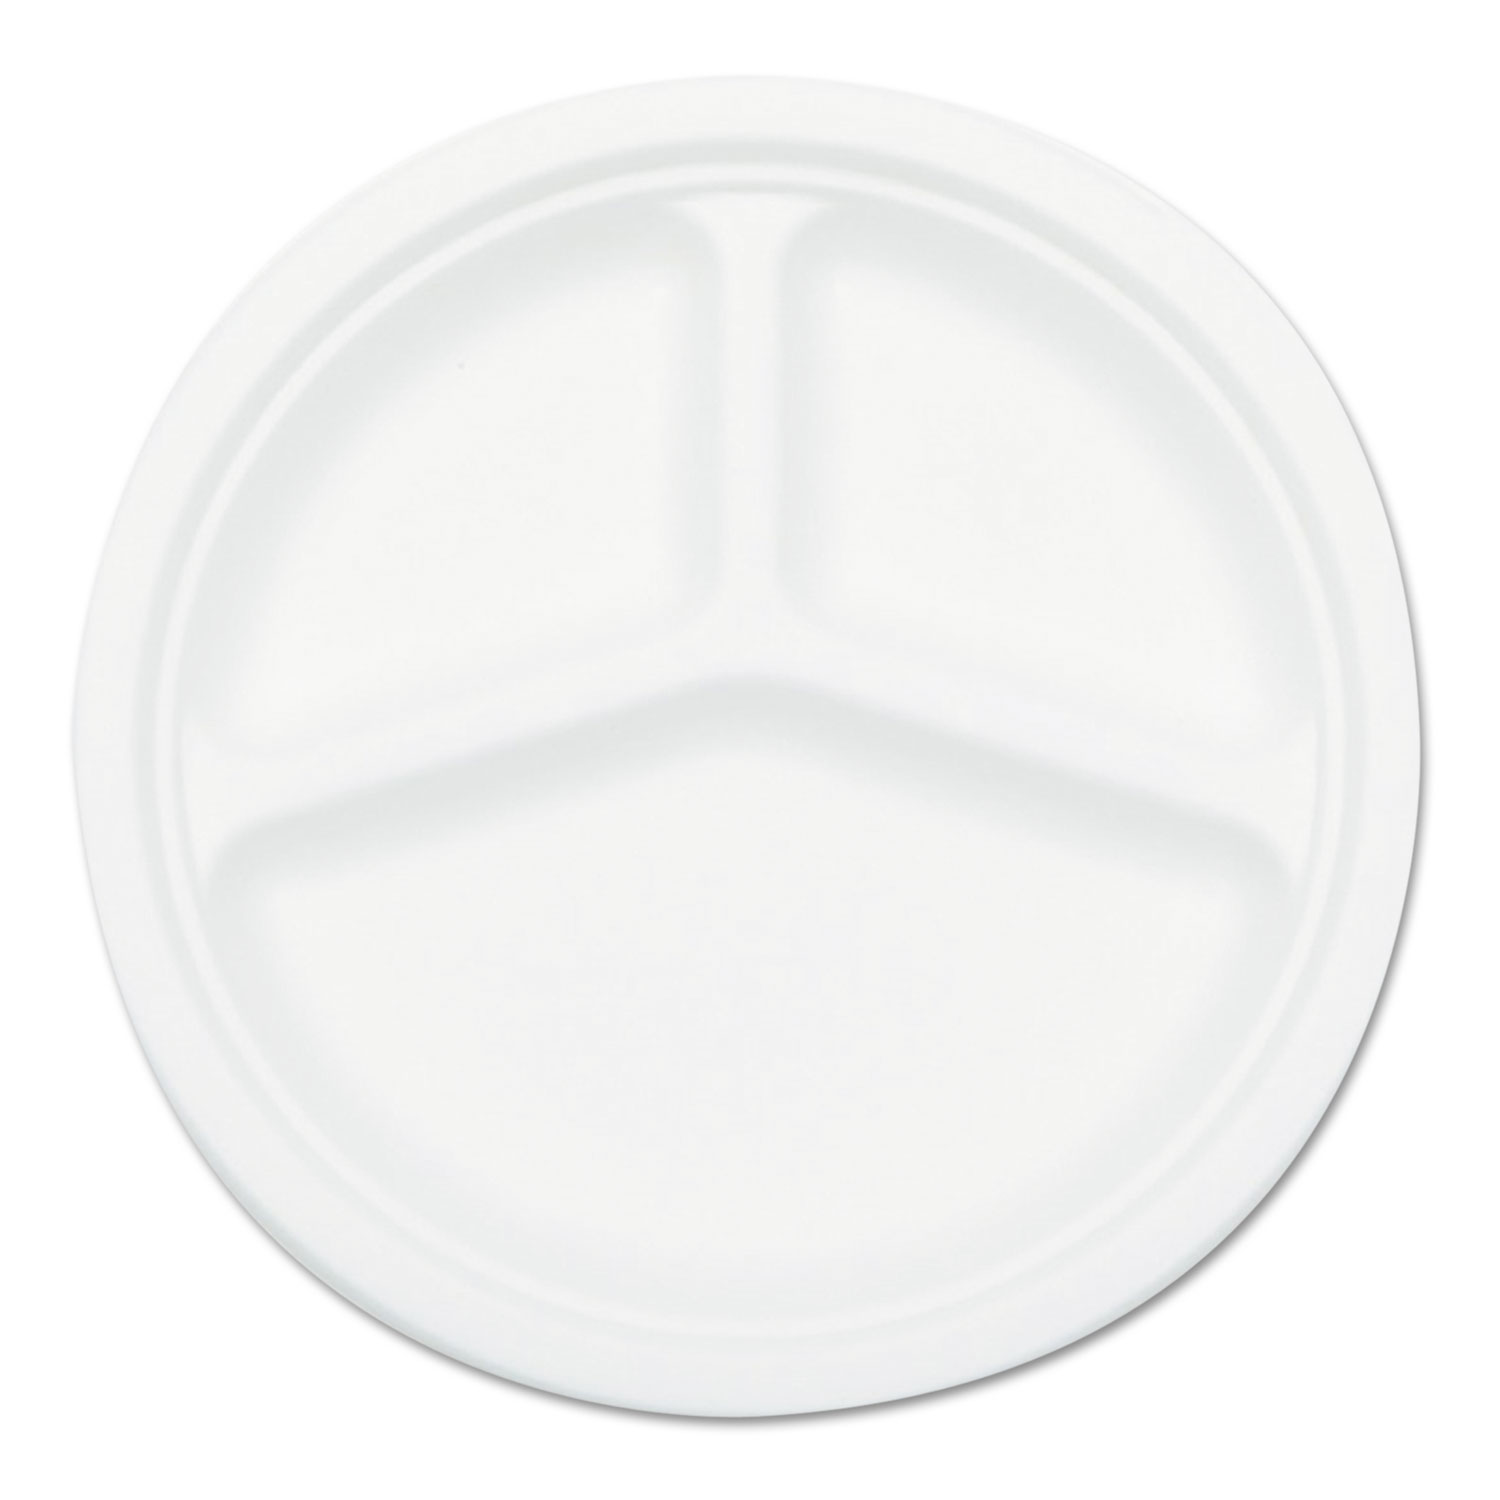 Savannah Supplies Inc. SVAP007 NatureHouse Compostable Sugarcane Bagasse 10 in 3-Compartment Plate, Round, White, 50/Pack